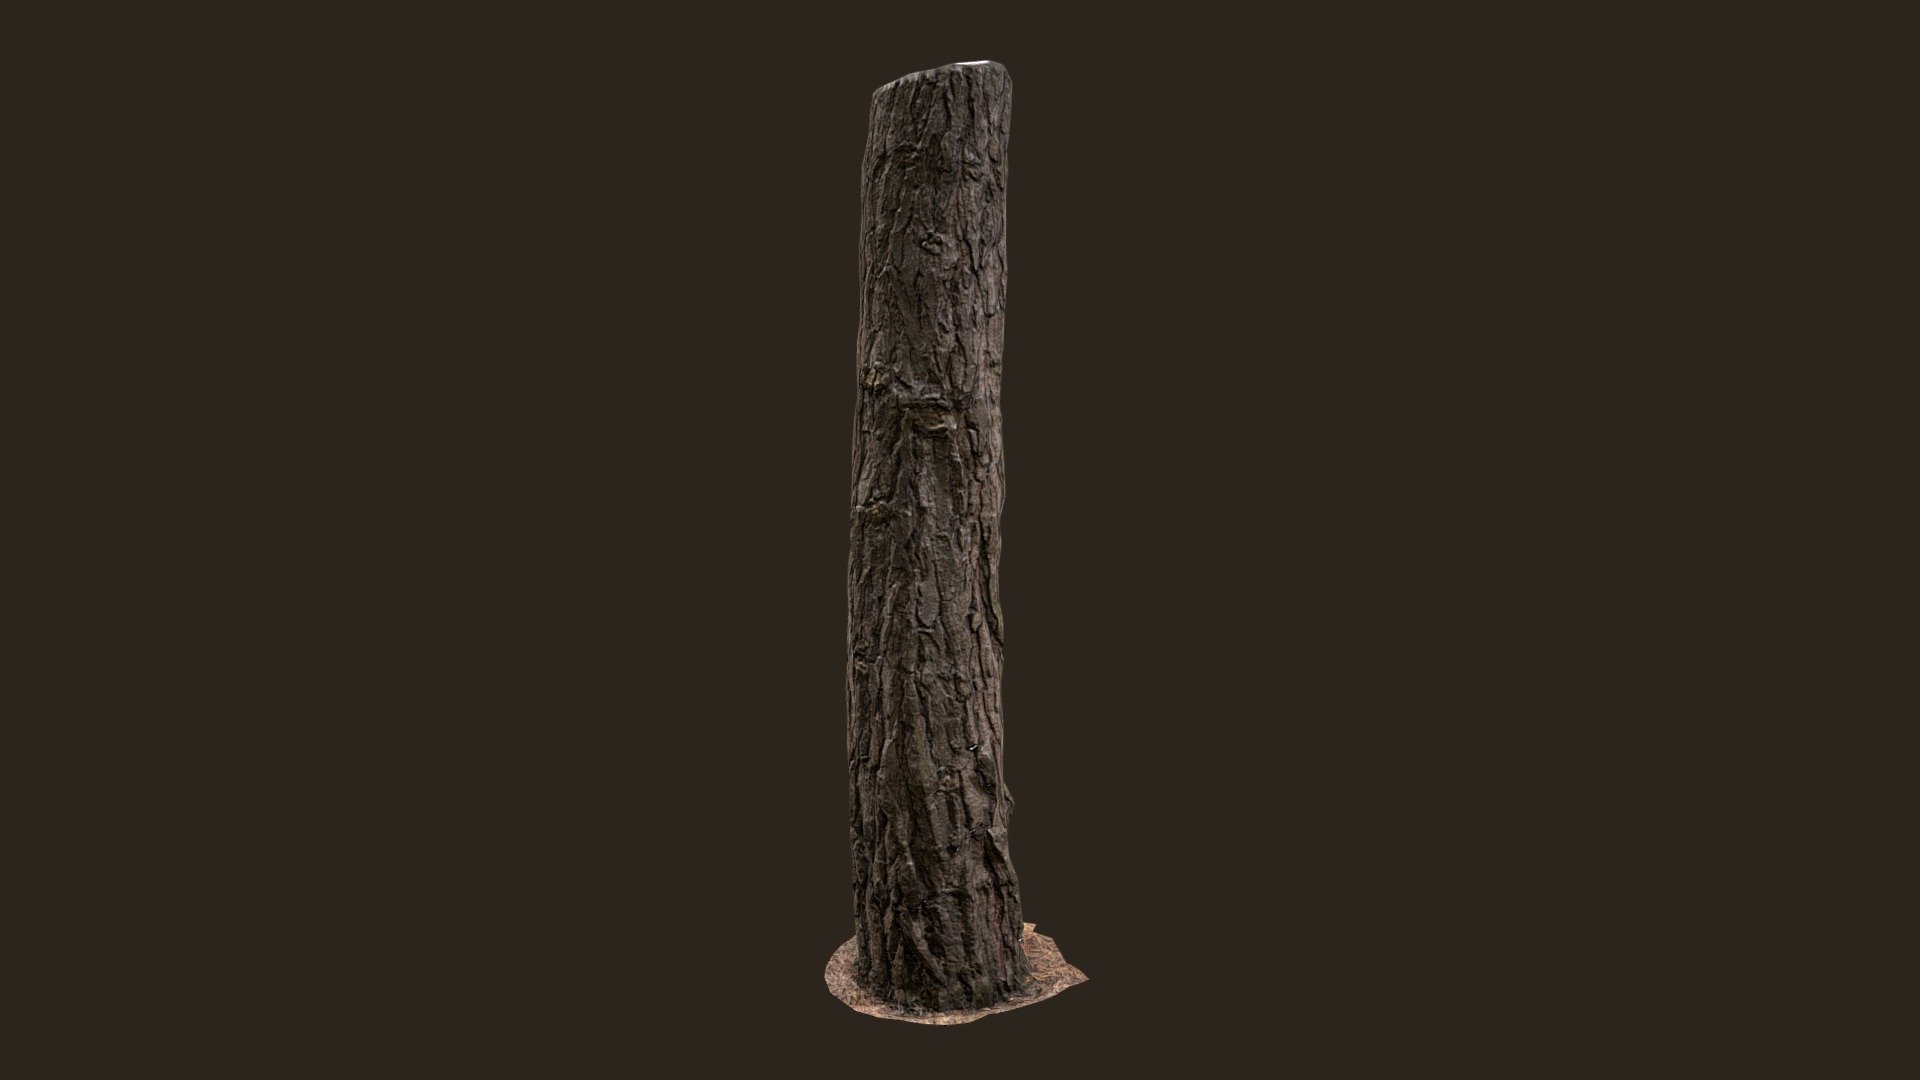 Mesh generated from photogrammetry data, also available in a pack of 12 tree trunks: https://sketchfab.com/3d-models/3d-scanned-tree-trunks-pack-01-989a4a762db44c4384a9262ee63accaf

The mesh comes with 4K Albedo, Specular, Cavity, Normal, Height and AO textures

More information at http://www.blog.moonday.fr/2020/07/sketchfab-store-pack-02.html - 3D scanned Tree trunk 09 - Buy Royalty Free 3D model by 1k0 3d model